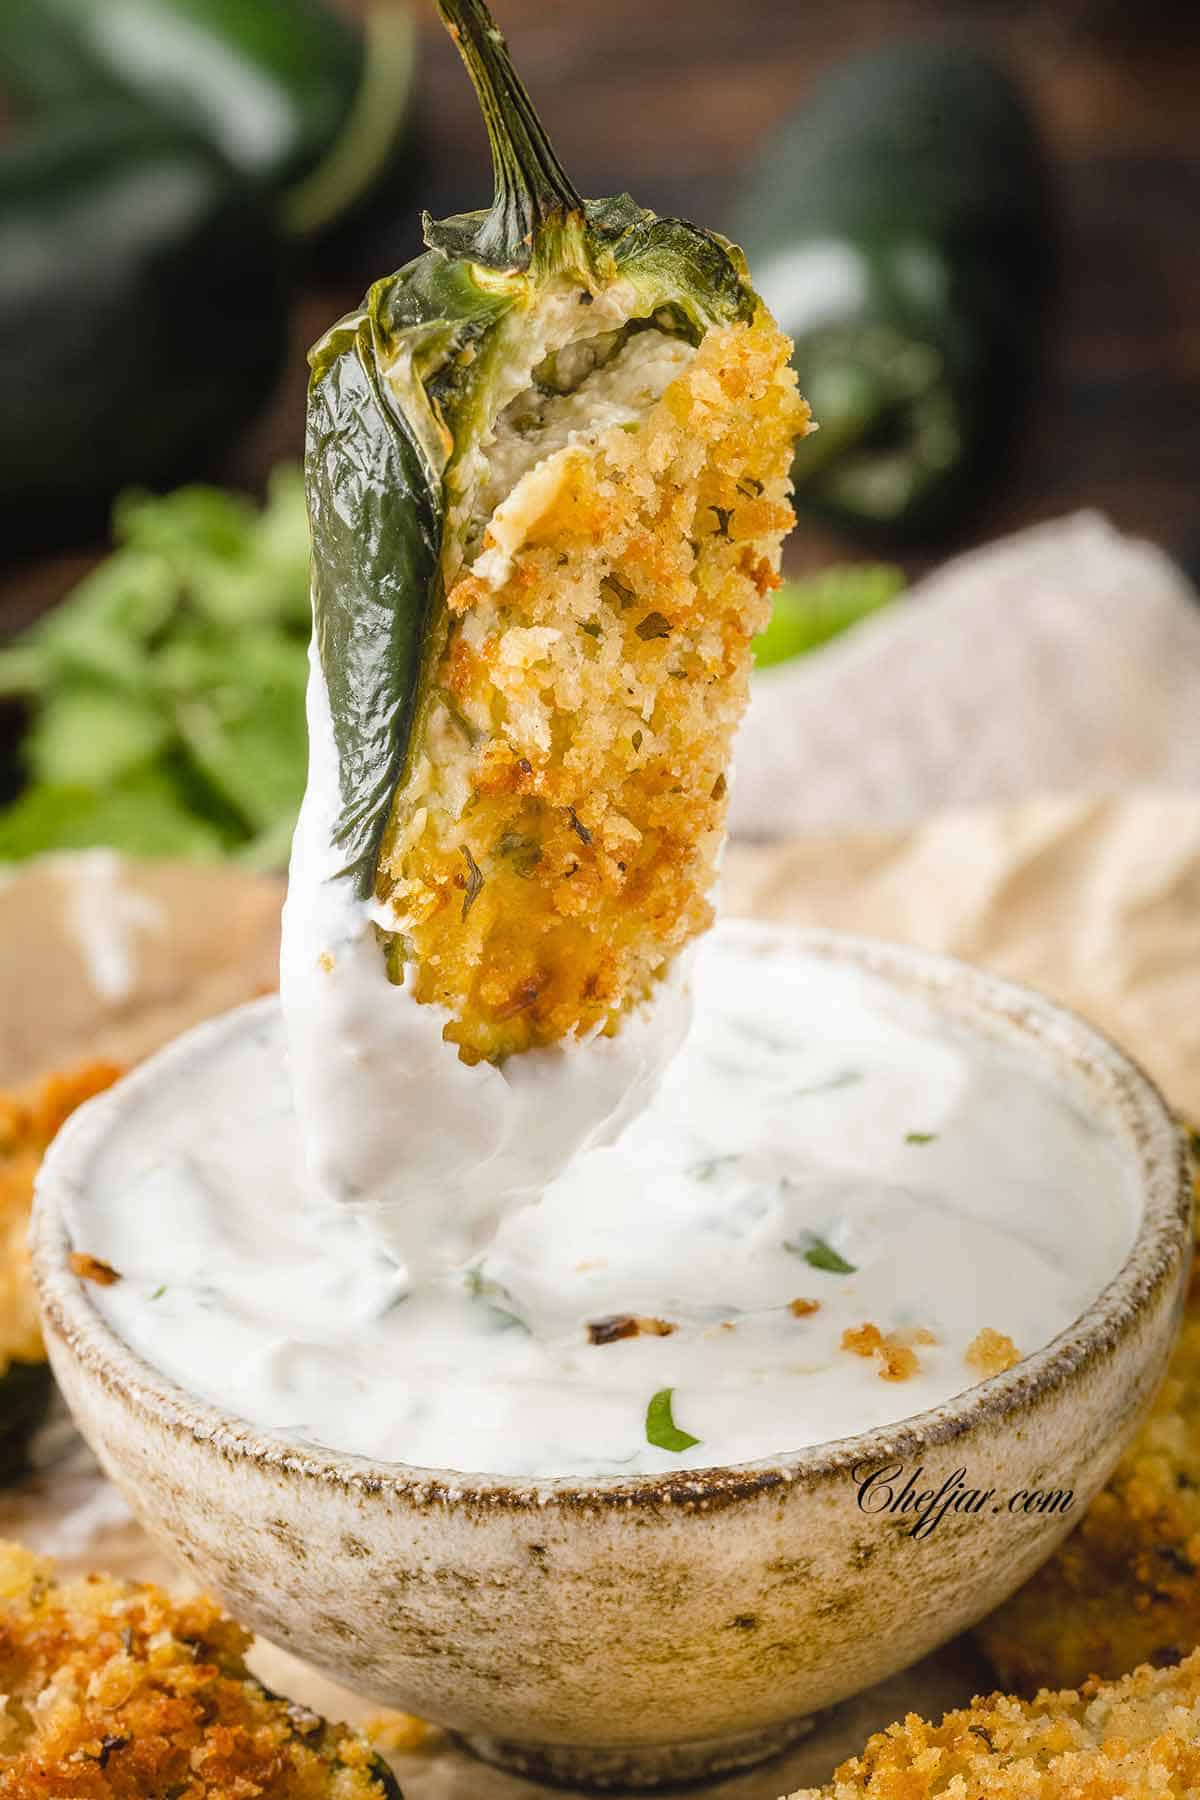 Dipping an air fried jalapeno pepper in a sour cream dip.